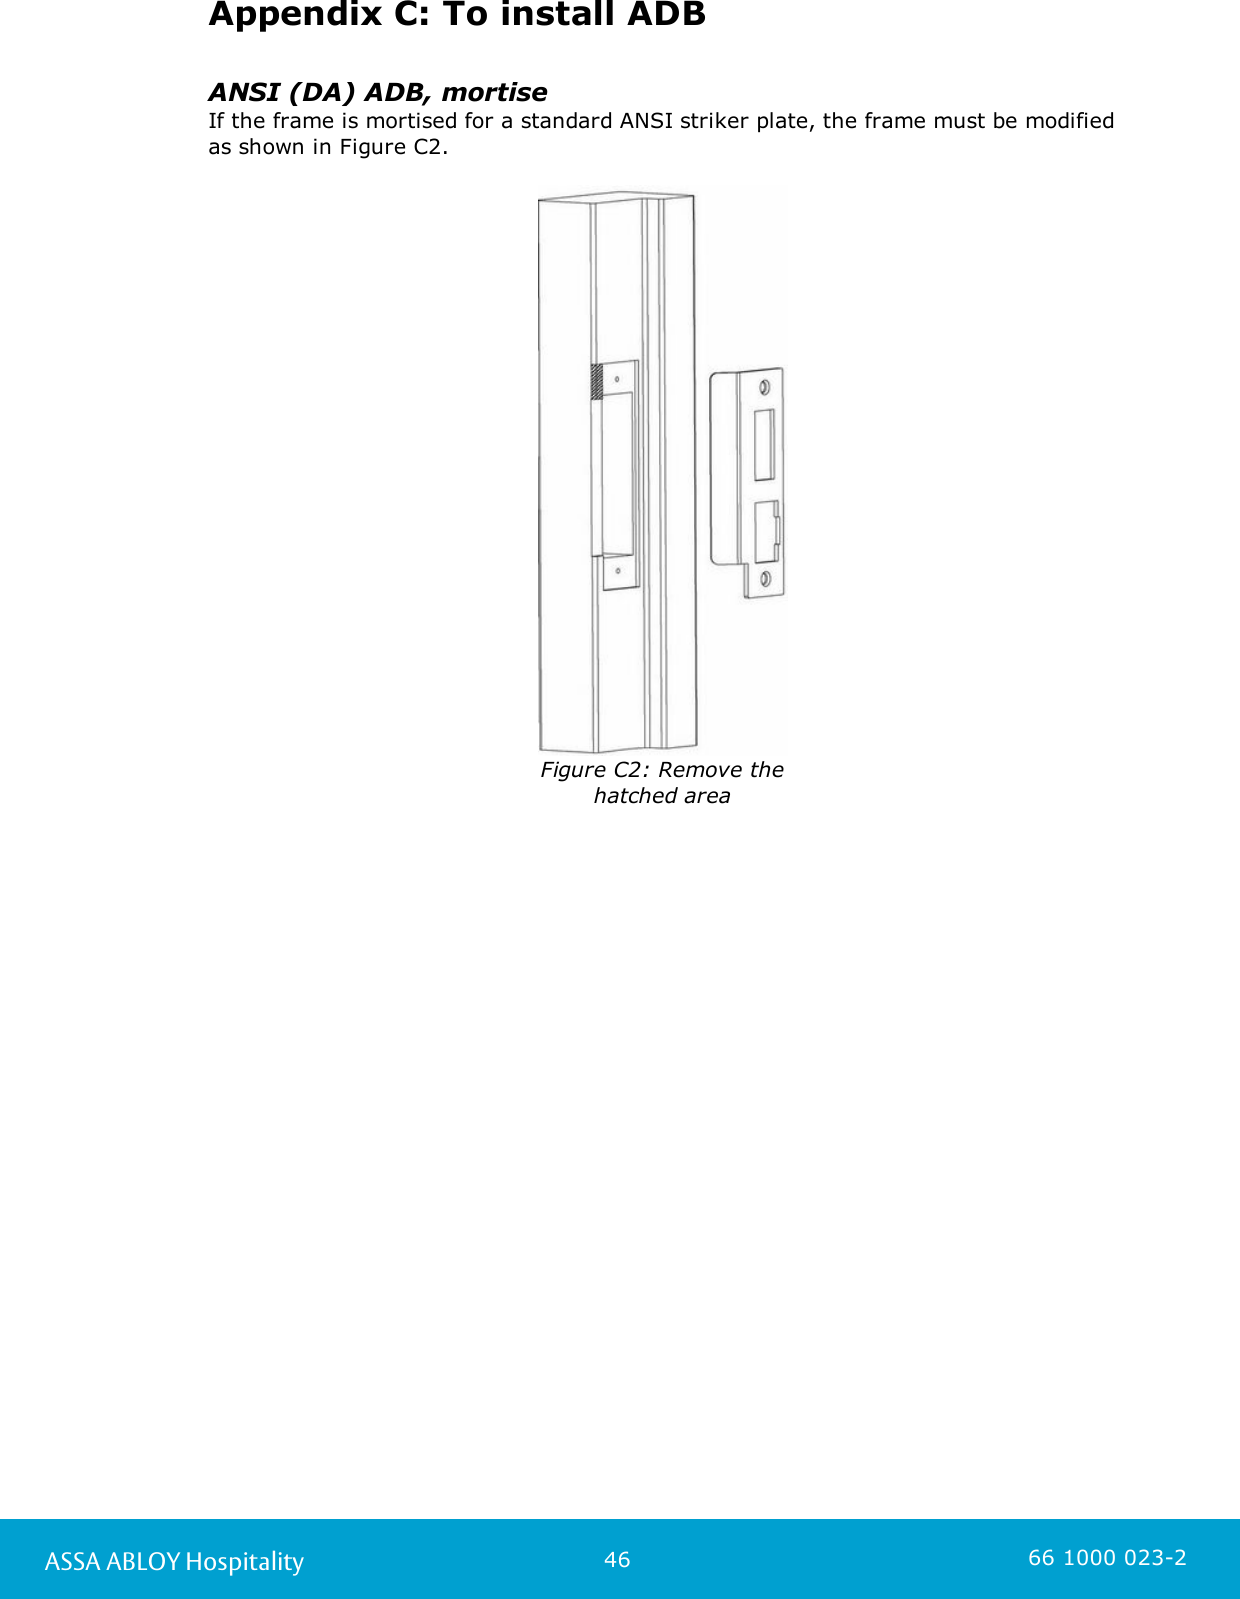 46ASSA ABLOY Hospitality 66 1000 023-2Appendix C: To install ADBANSI (DA) ADB, mortiseIf the frame is mortised for a standard ANSI striker plate, the frame must be modifiedas shown in Figure C2.Figure C2: Remove thehatched area